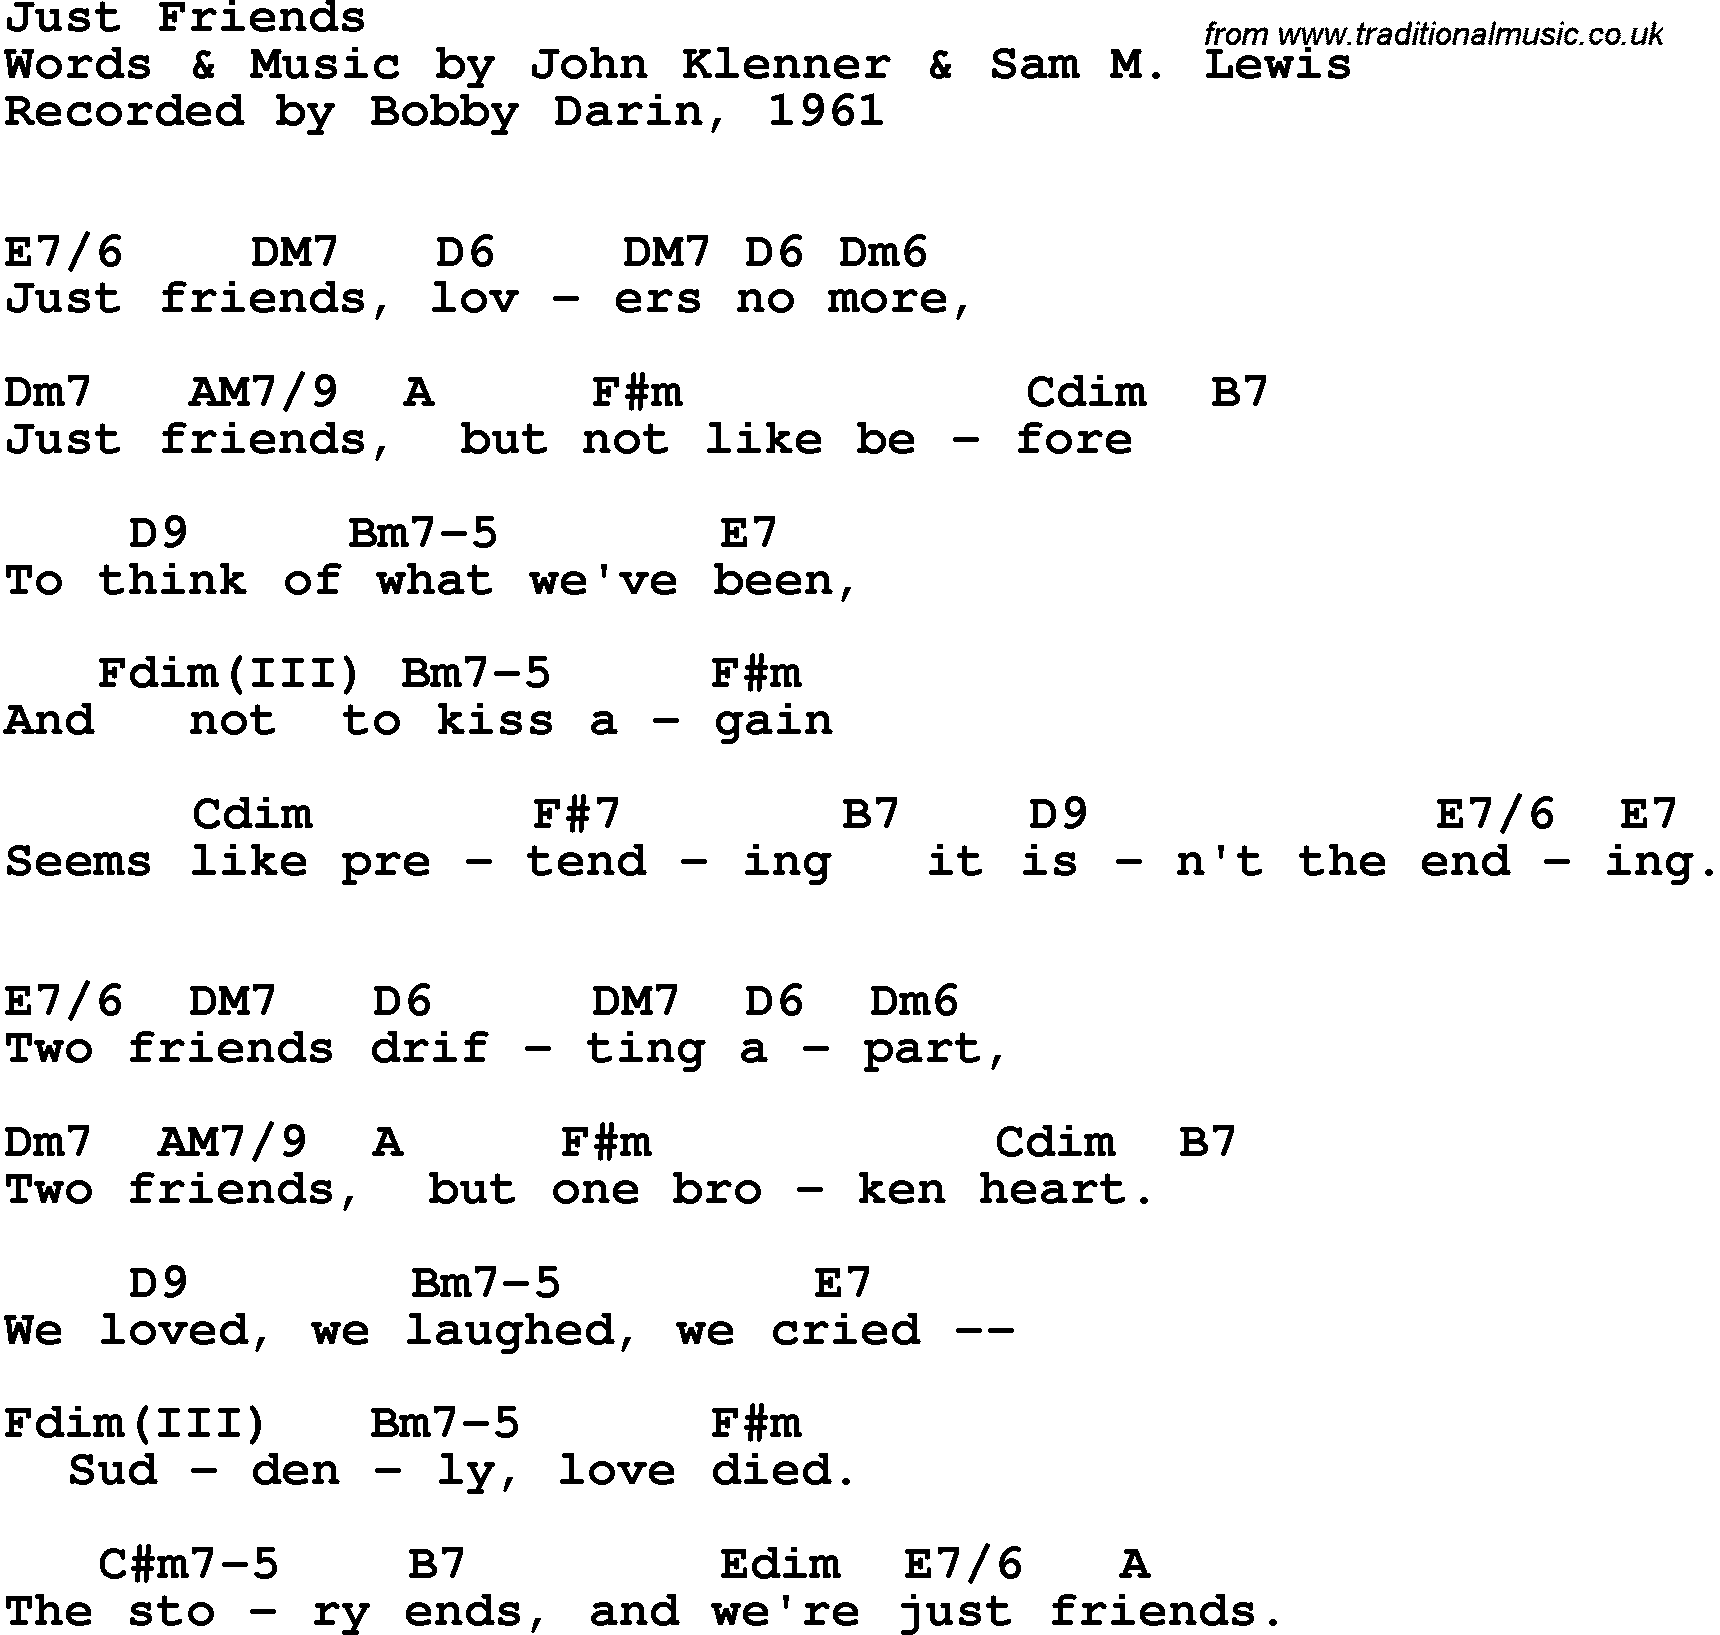 Song Lyrics with guitar chords for Just Friends - Bobby Darin, 1961